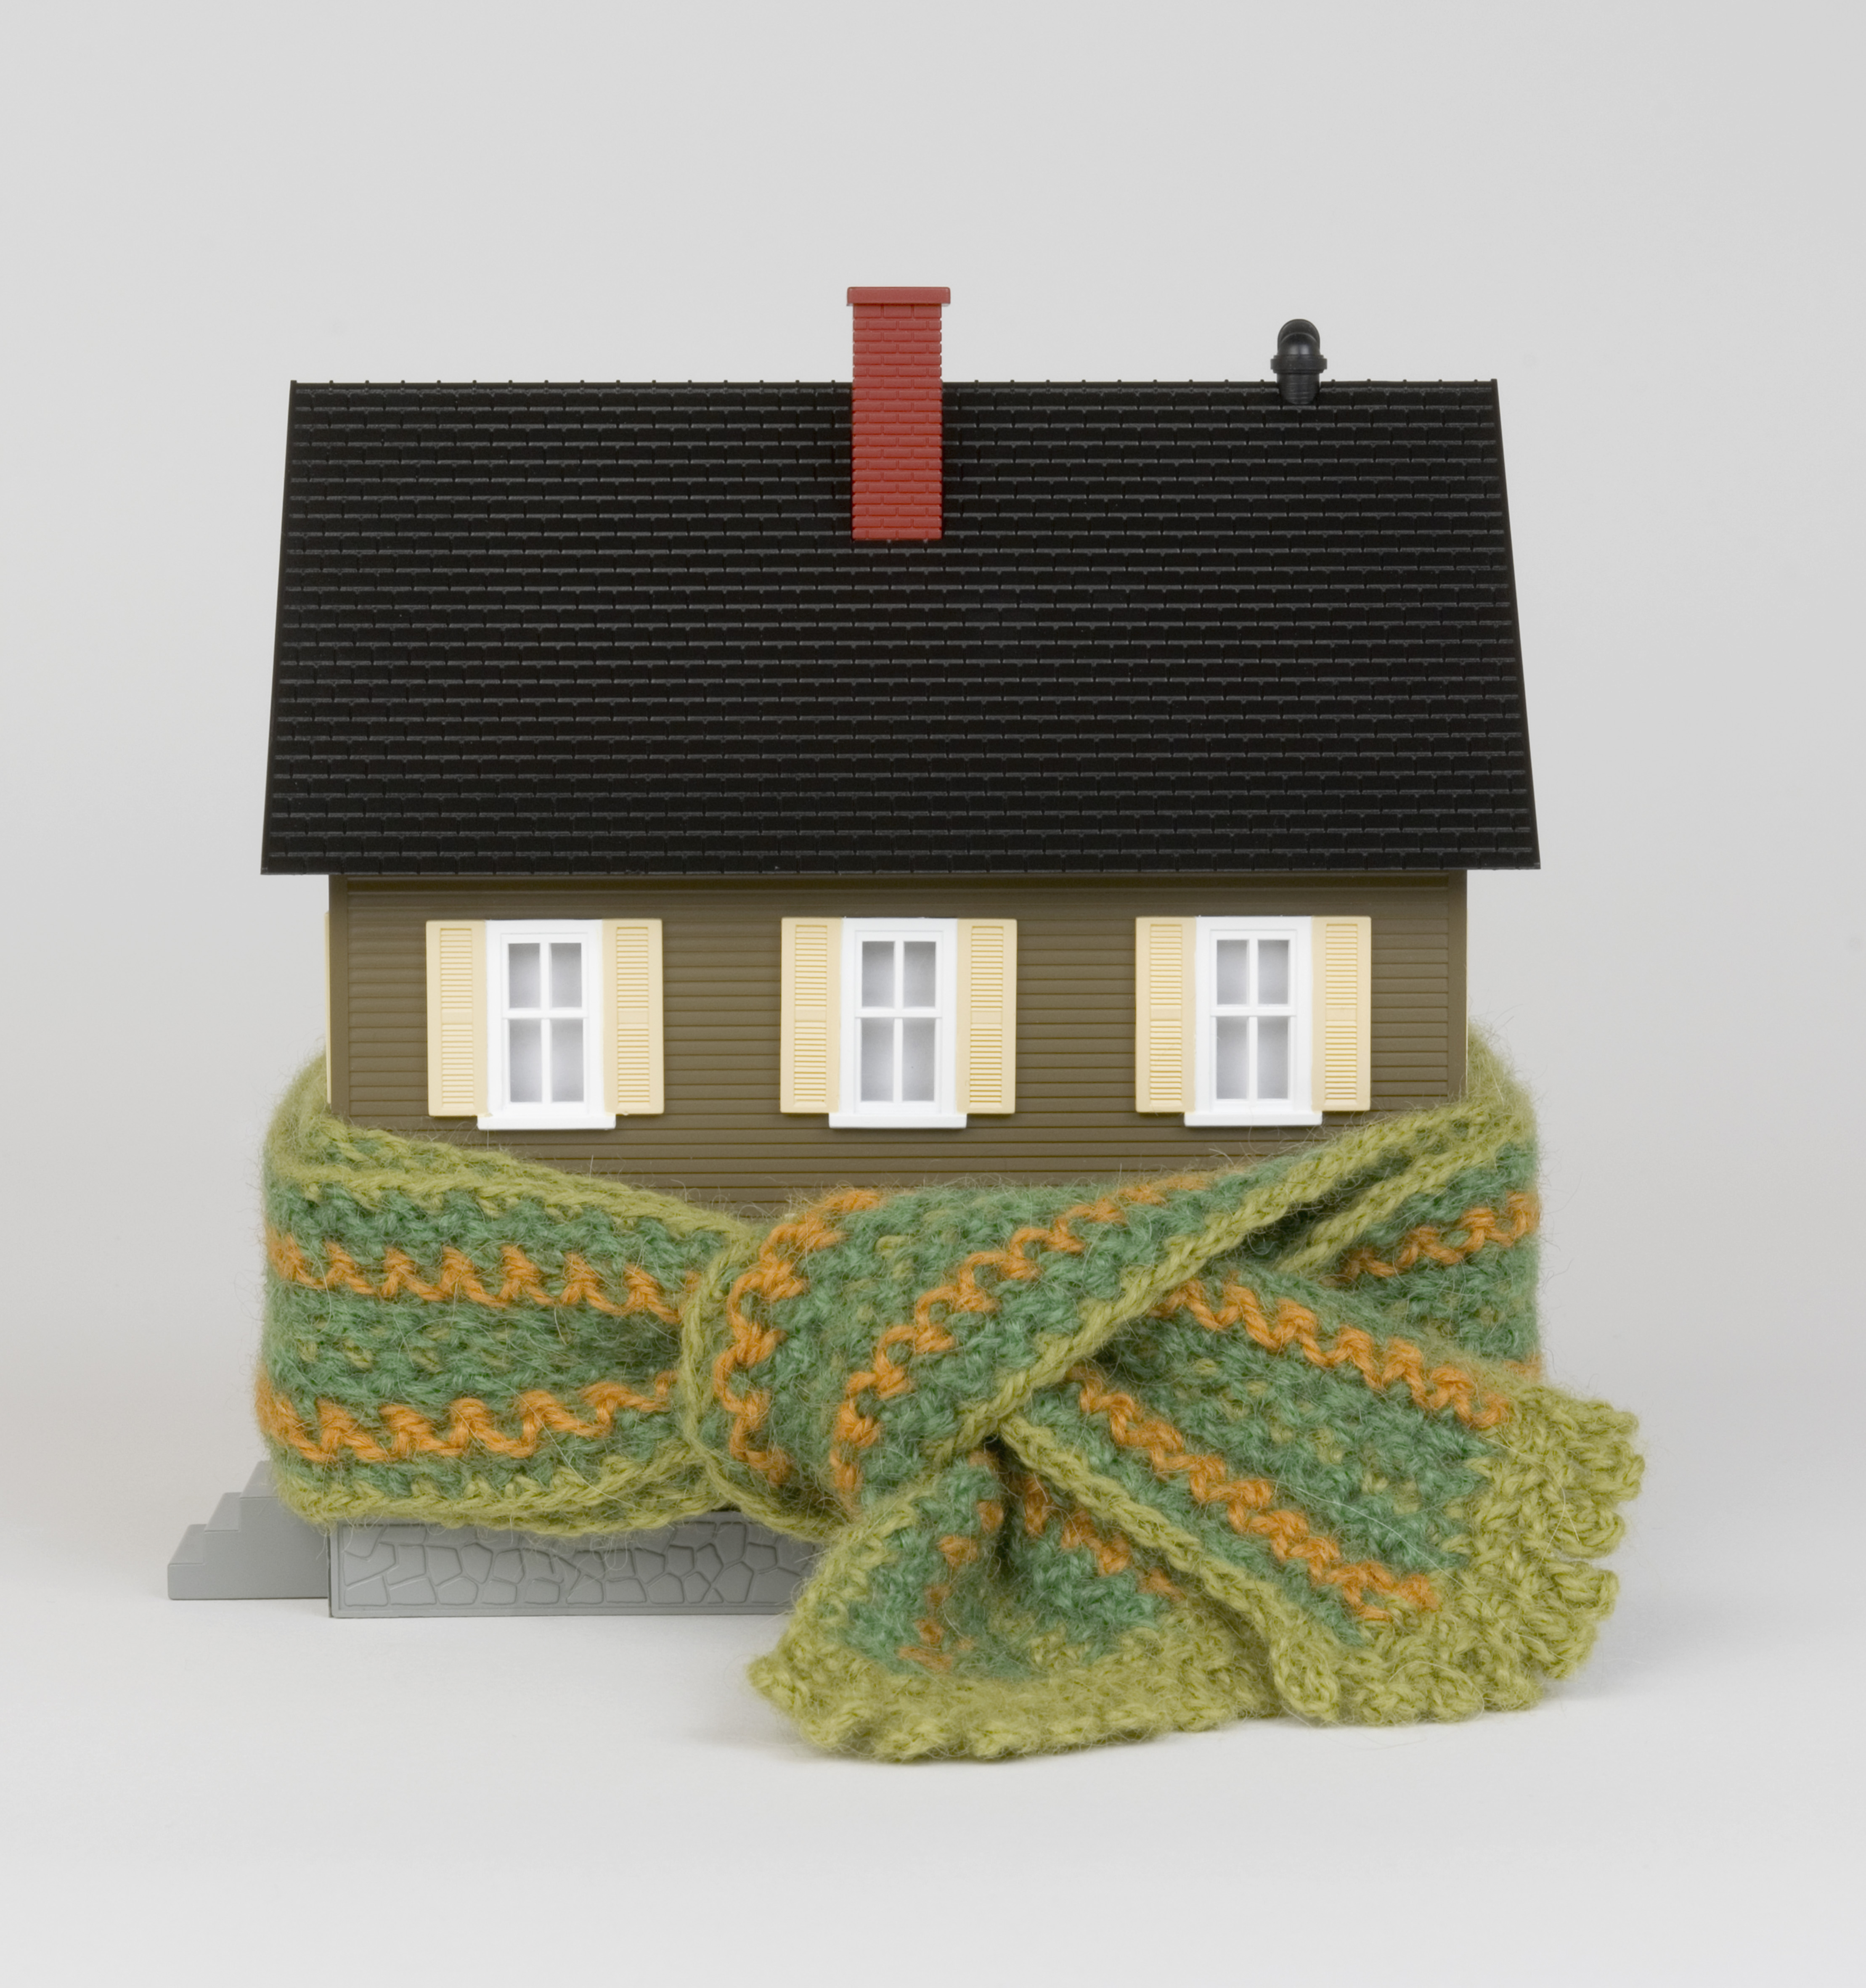 Keep your home warm and cozy while conserving energy this winter with simple actions.